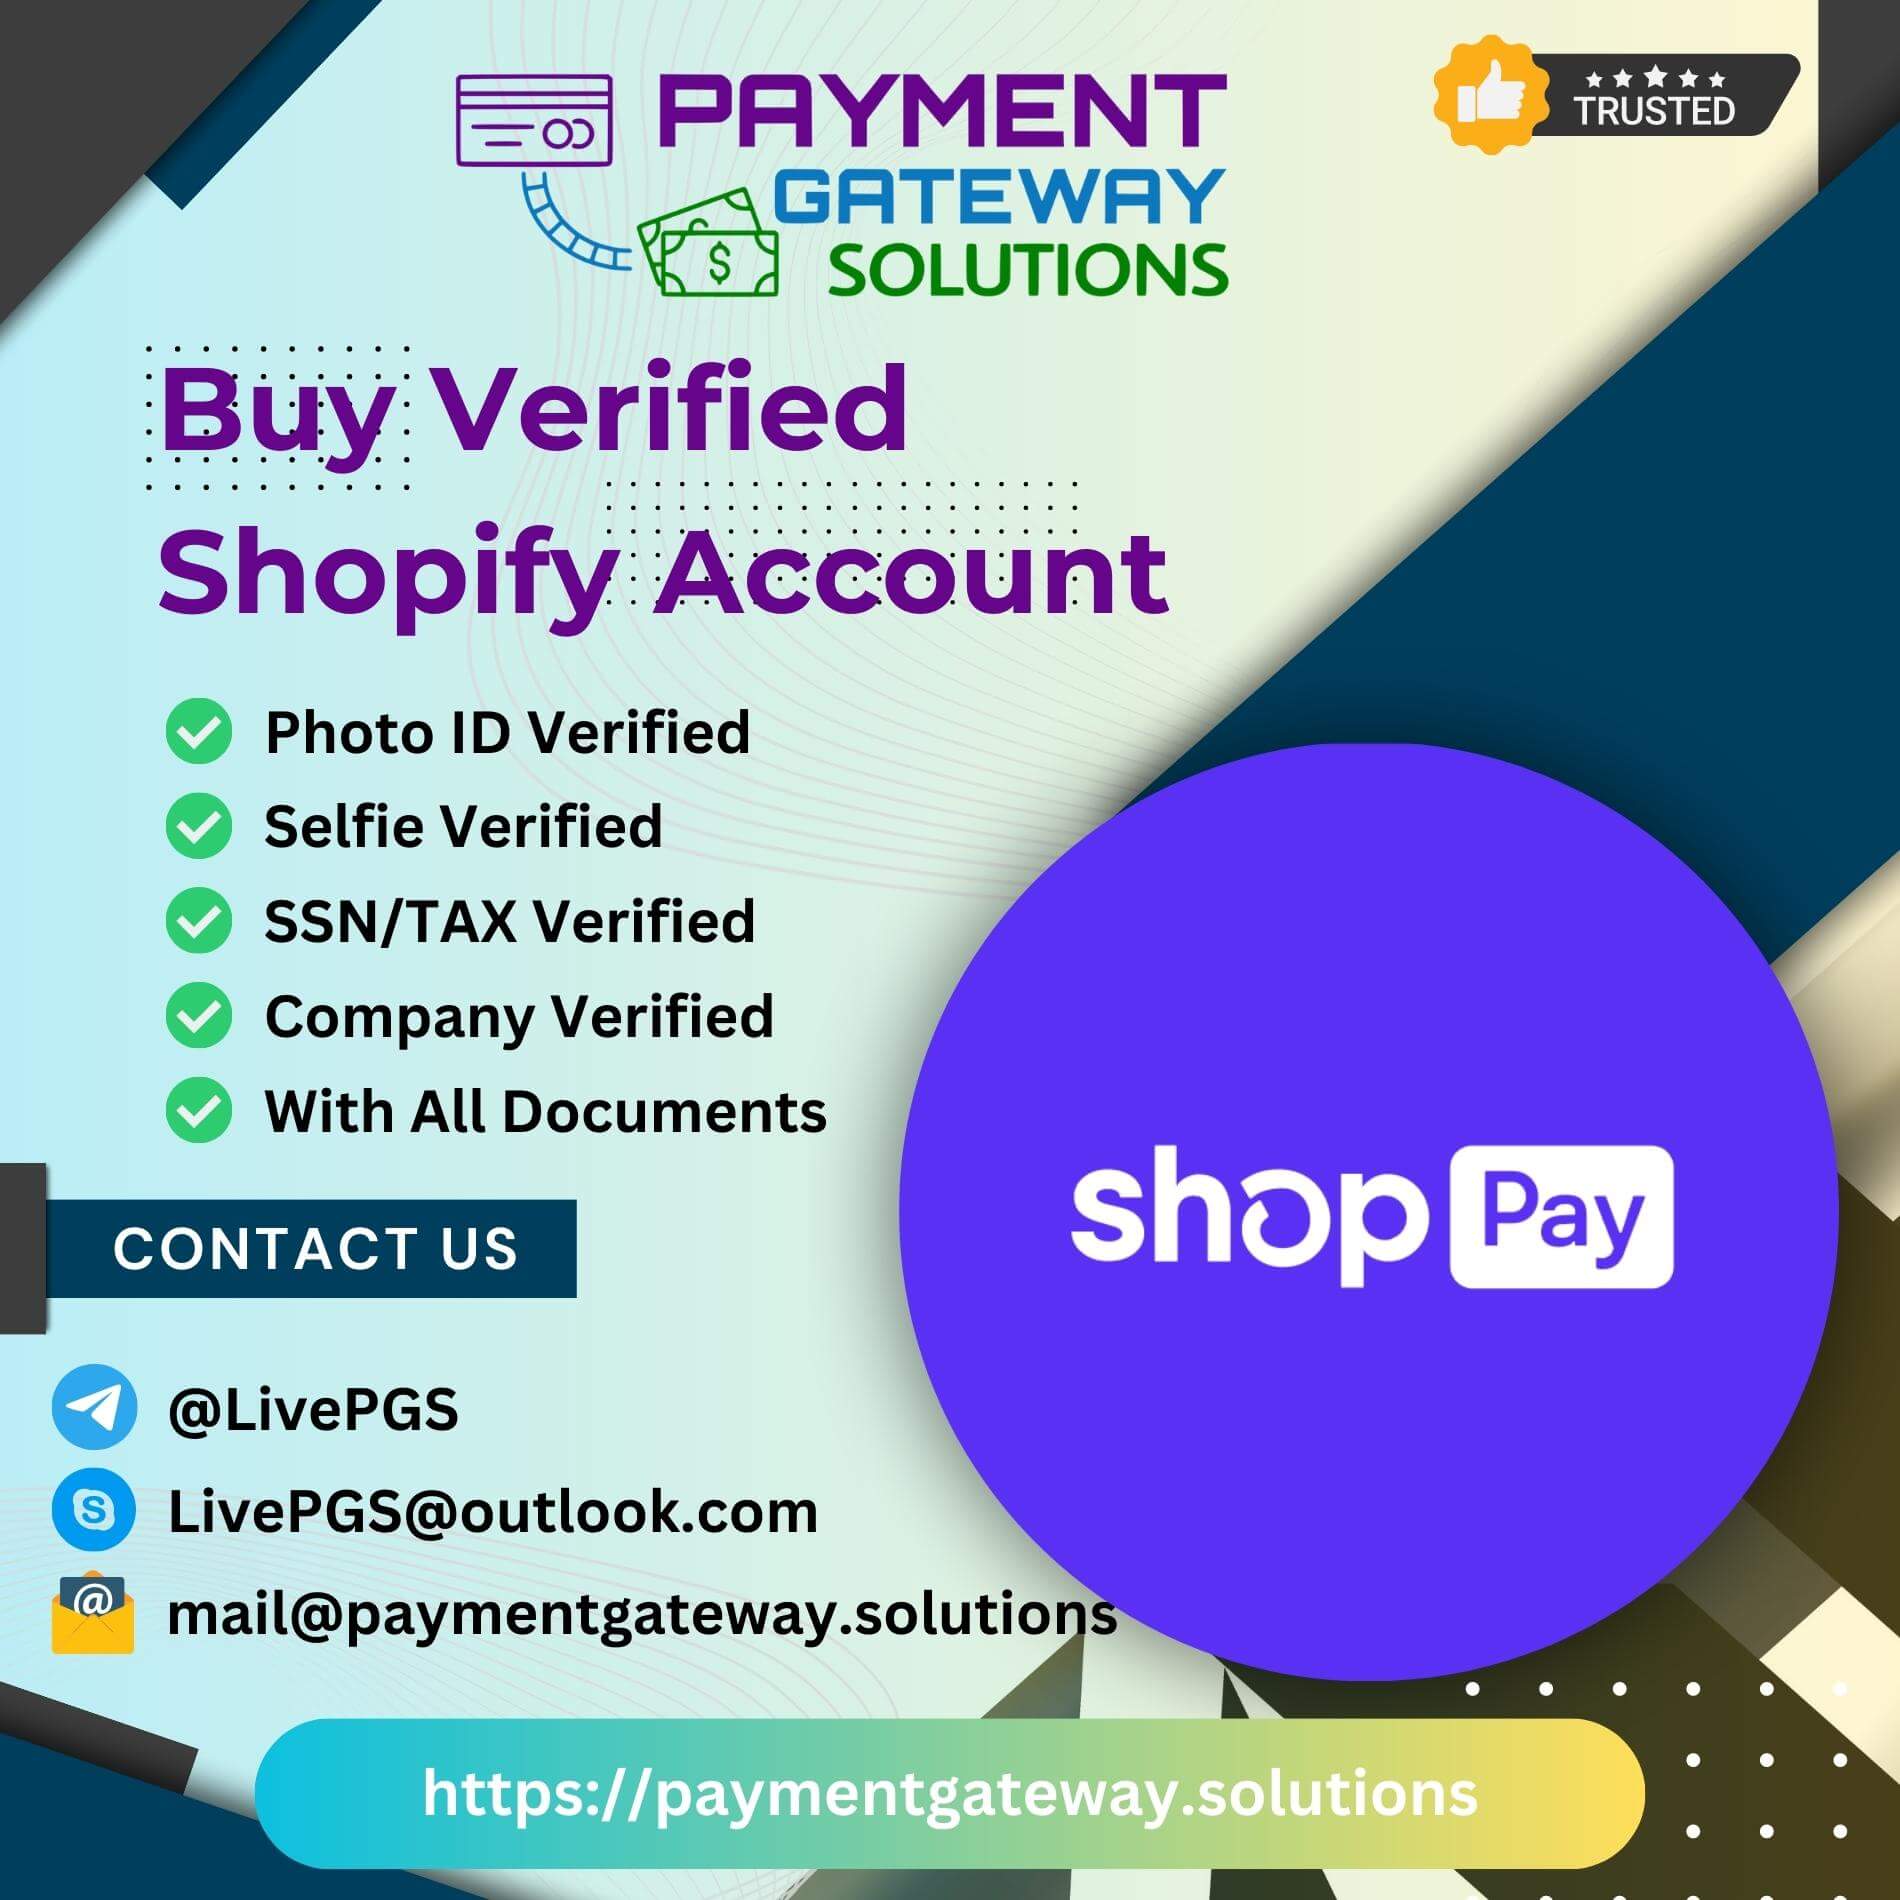 Shopify Integration for Payoneer Checkout for Online Stores